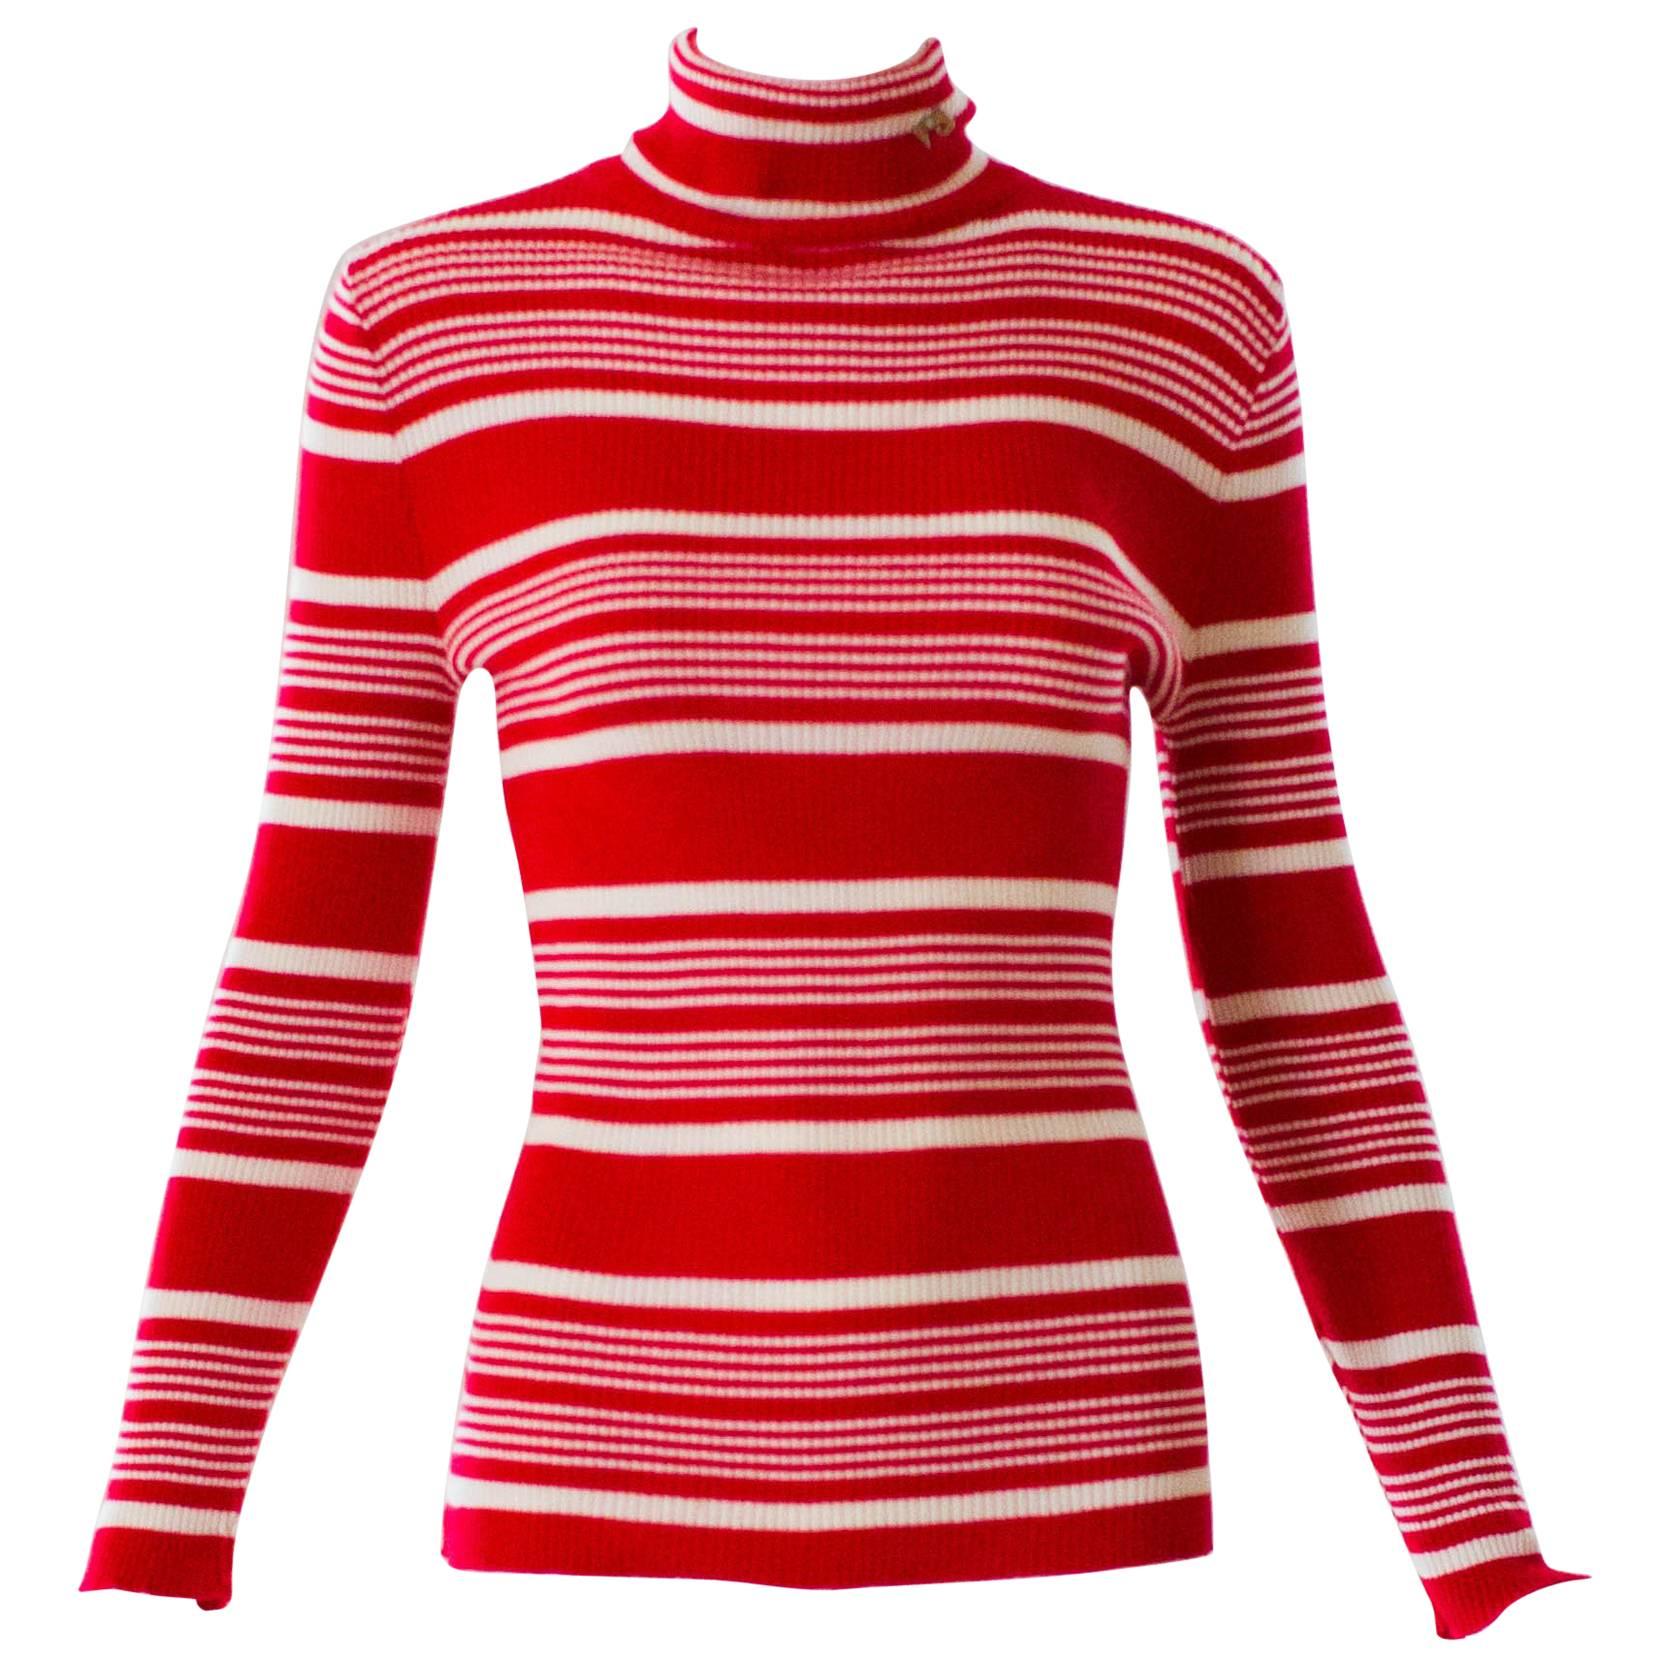 1970s Pierre Cardin Red and White Striped Knit Turtleneck 